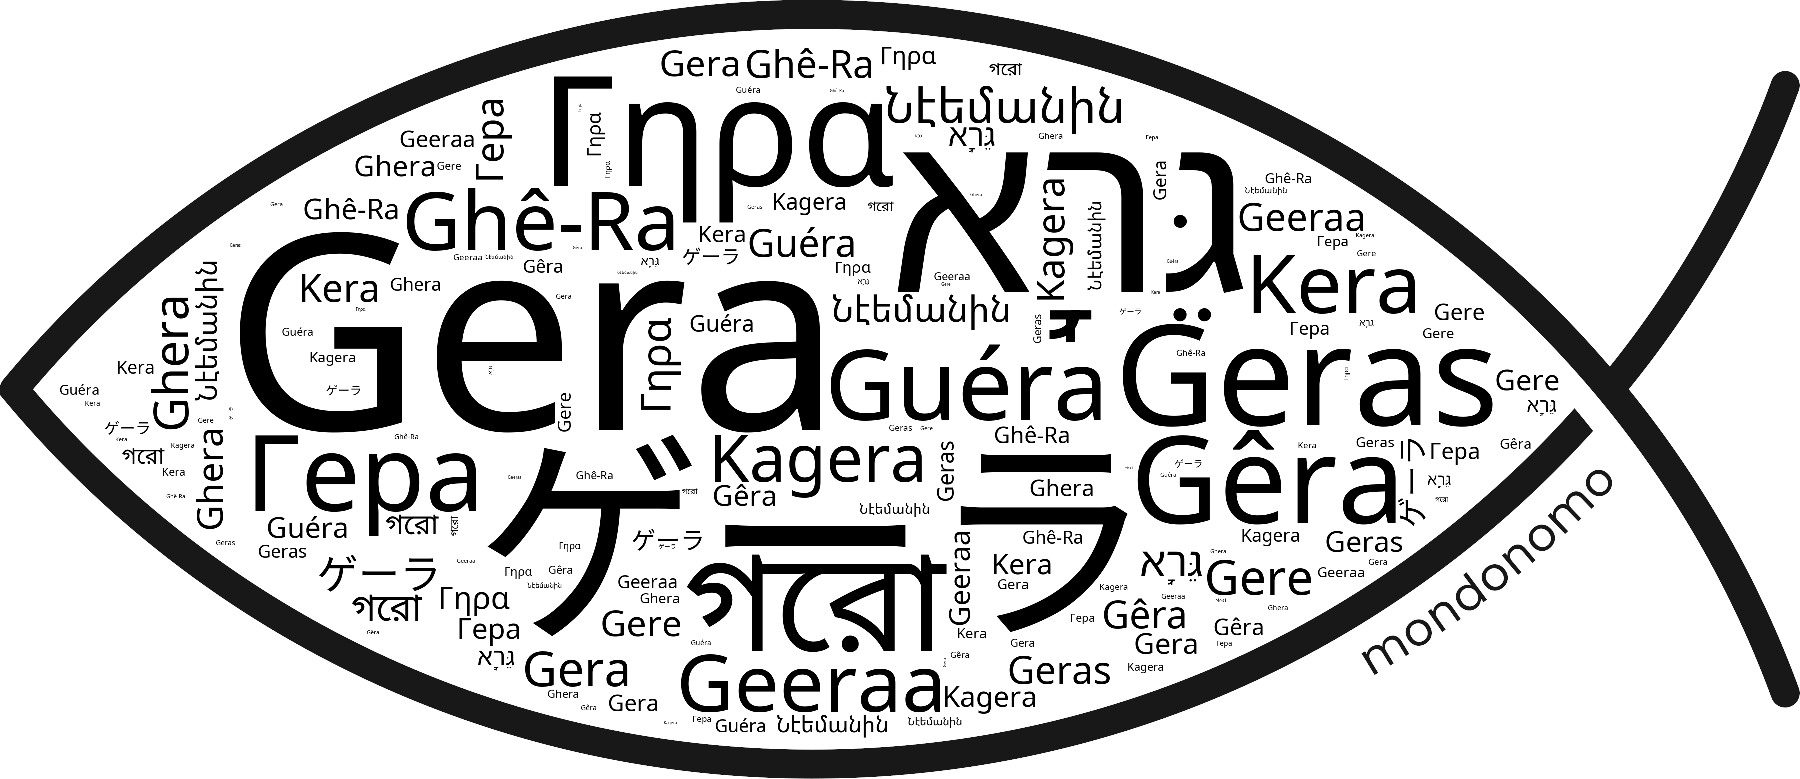 Name Gera in the world's Bibles